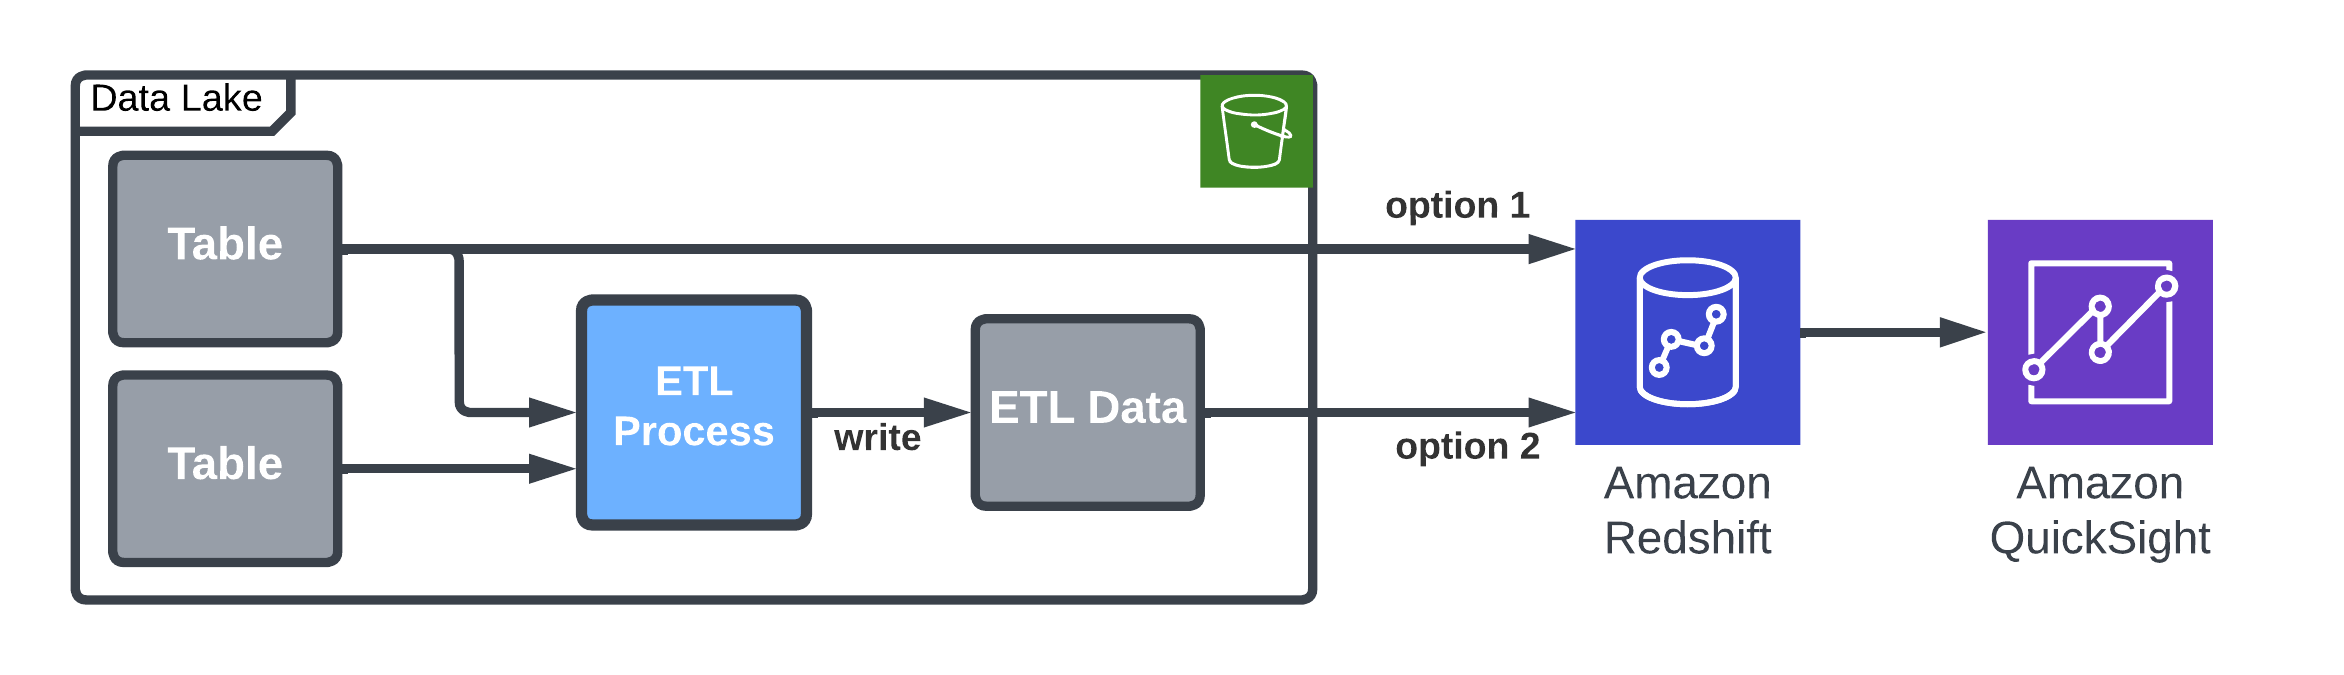 Architecture diagram details the options to load data into Redshift Serverless with or without an ETL process